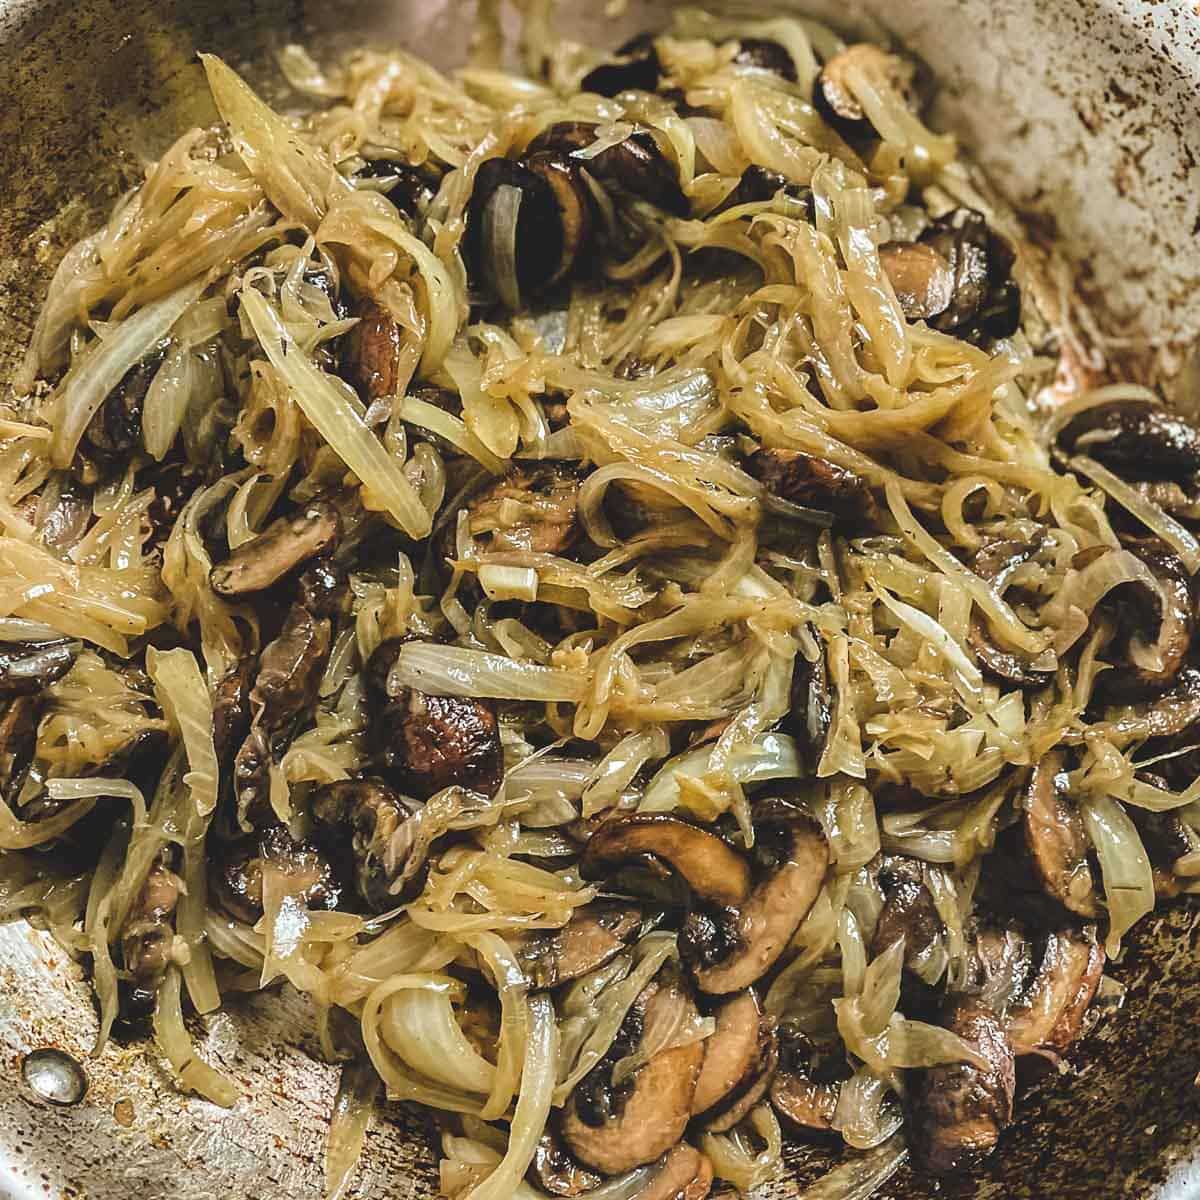 The caramelized onions and mushrooms are quite soft and are a light golden brown color.